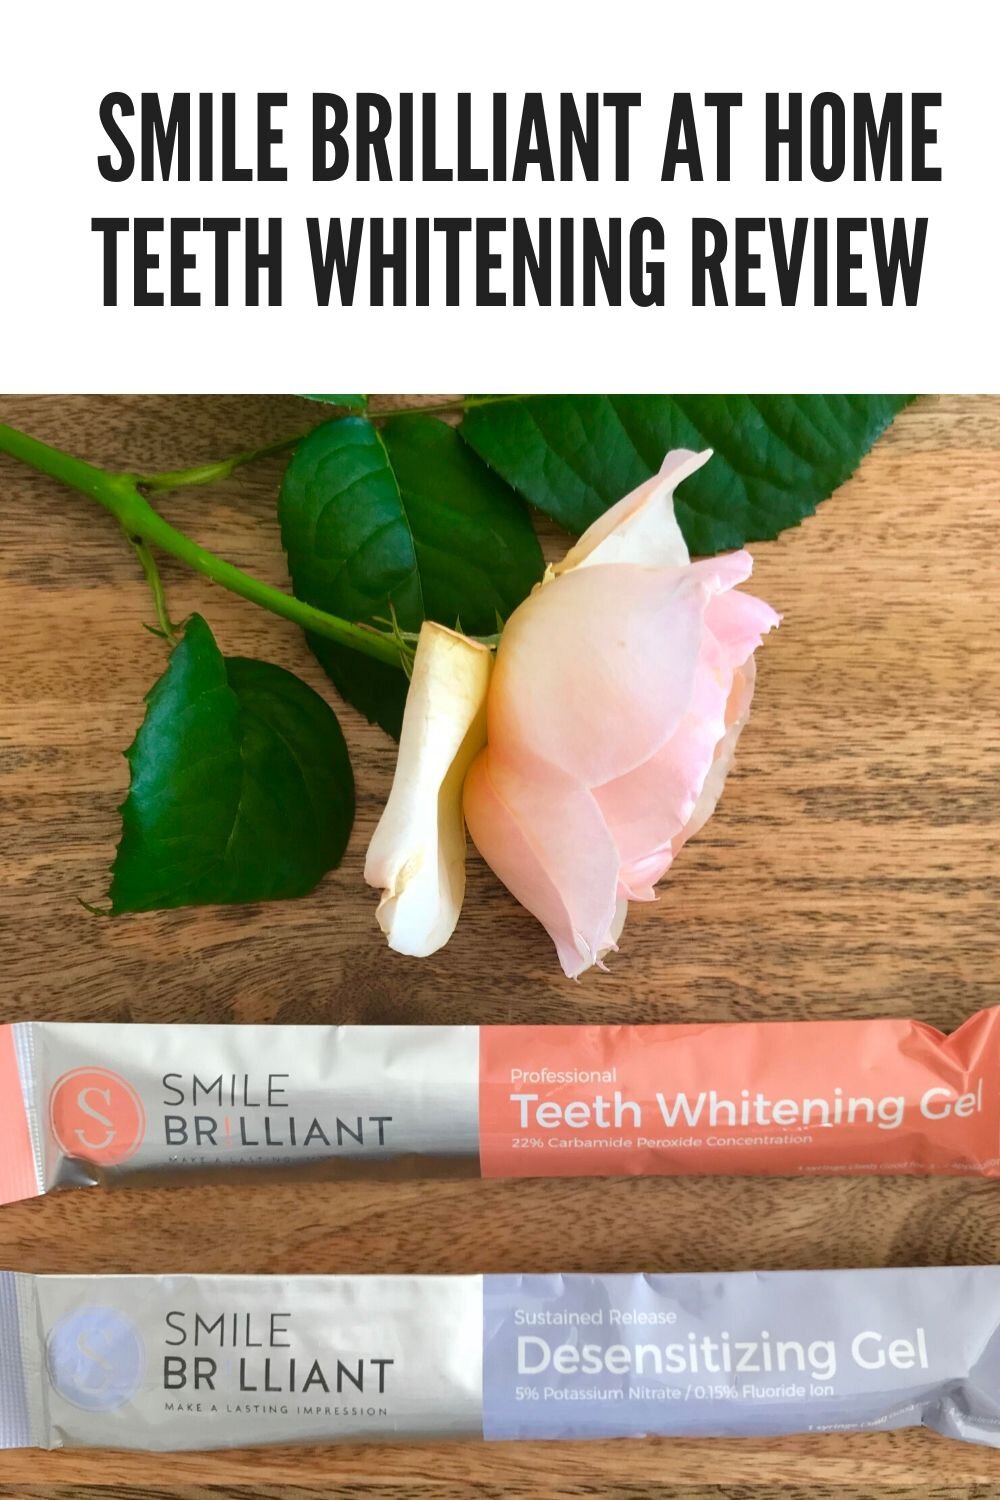 Smile Brilliant Review - See why Smile Brilliant lives up to the reviews regarding professional teeth whitening at home without any sensitivity. Before and after pictures included